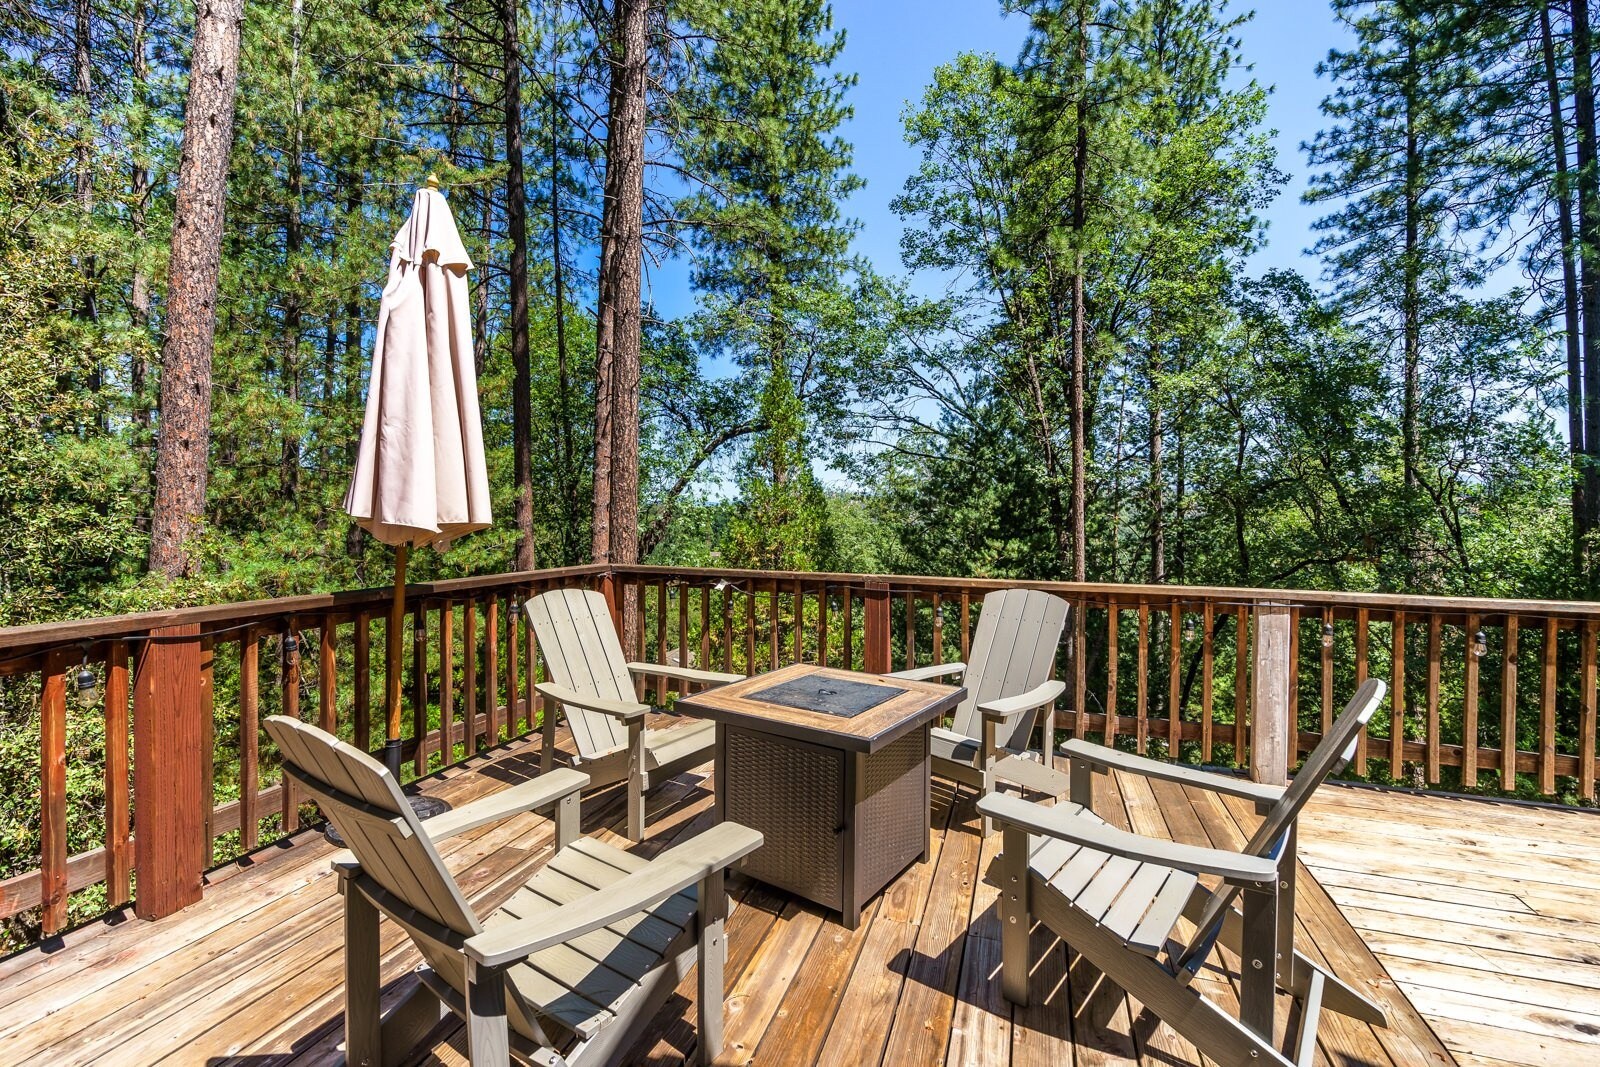 Fire pit area & seating. Unit 8 Lot 15, Pine Mountain Lake Vacation Rental, Hillside Haven.